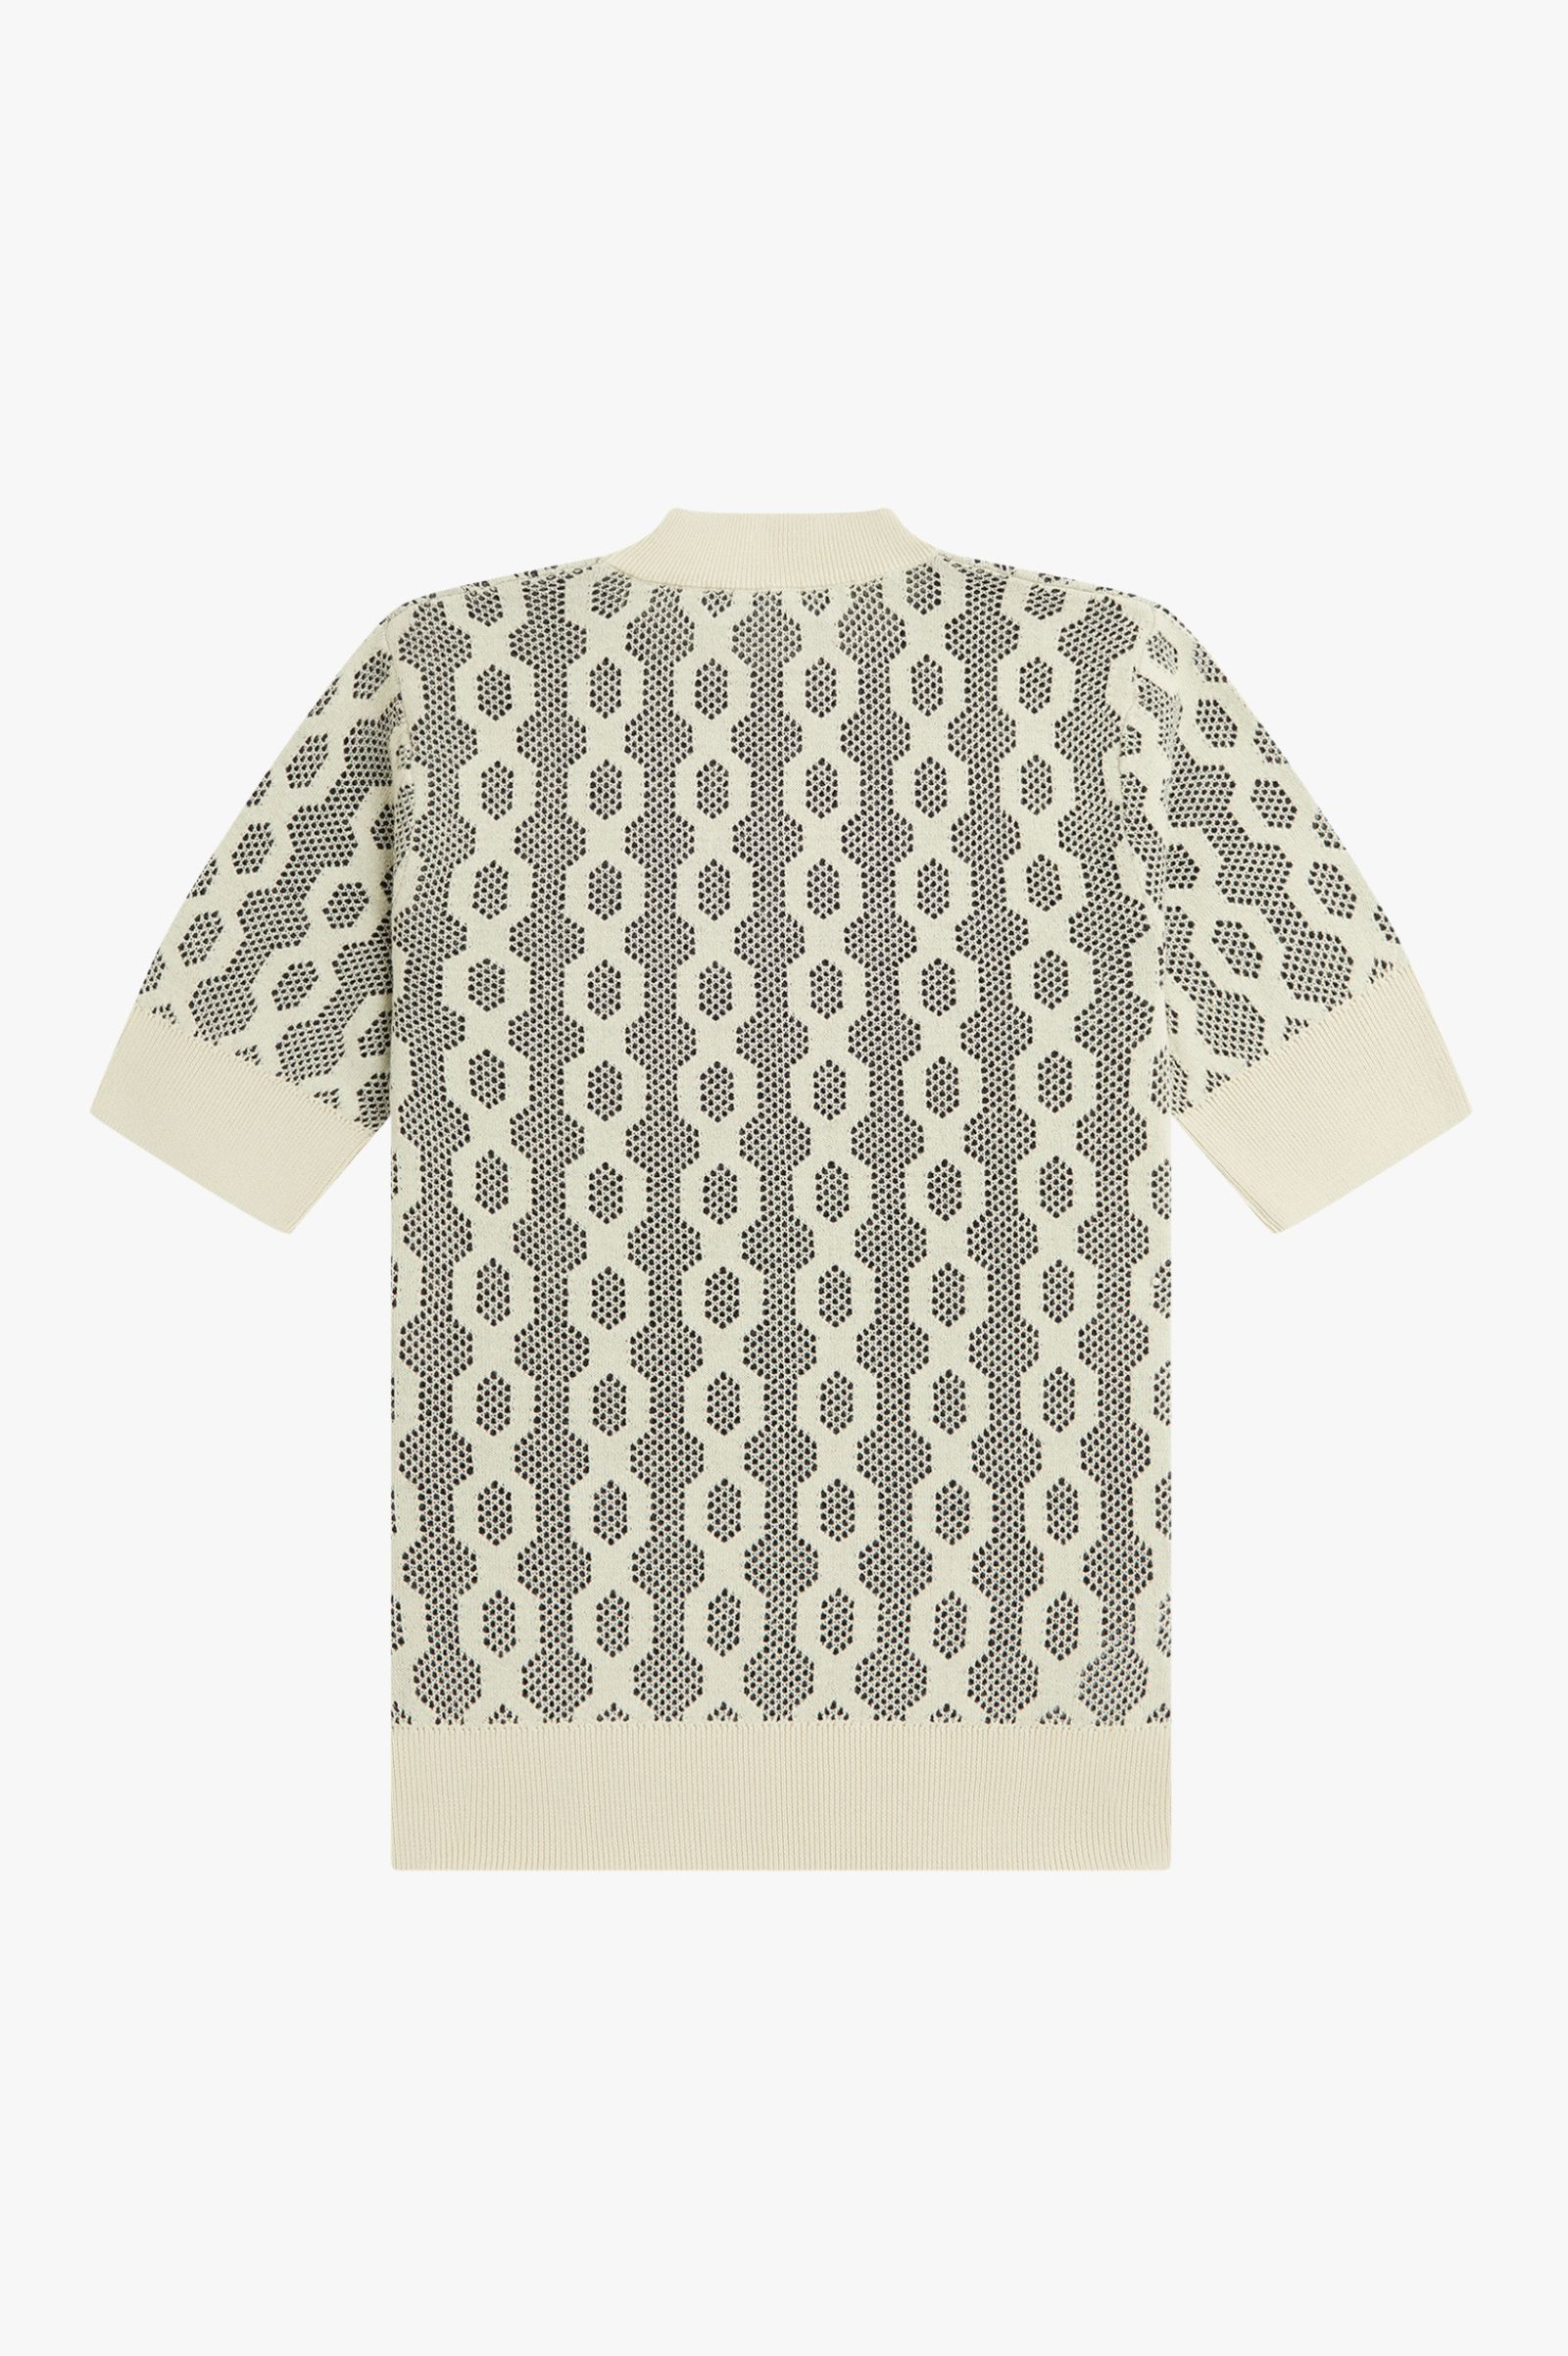 Fred Perry Open-Knit Short Sleeve Jumper in Oatmeal 